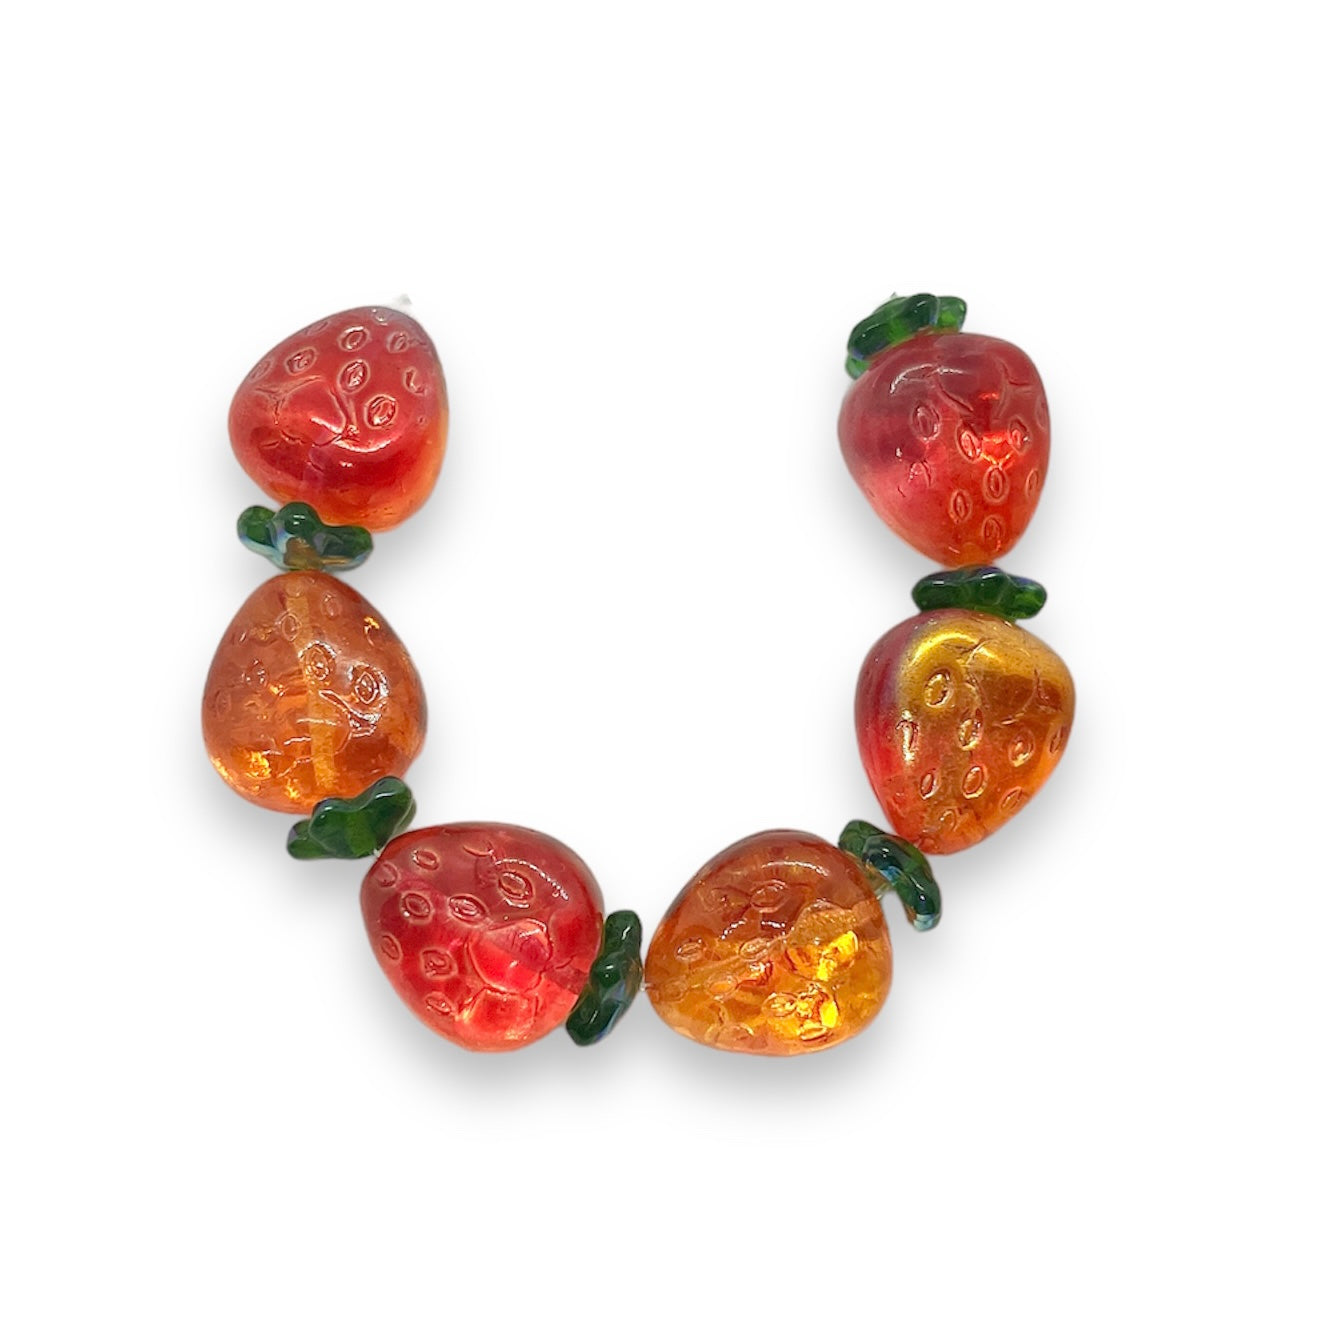 Czech glass strawberry fruit shaped beads charms & caps 6 sets red ora –  Orange Grove Beads